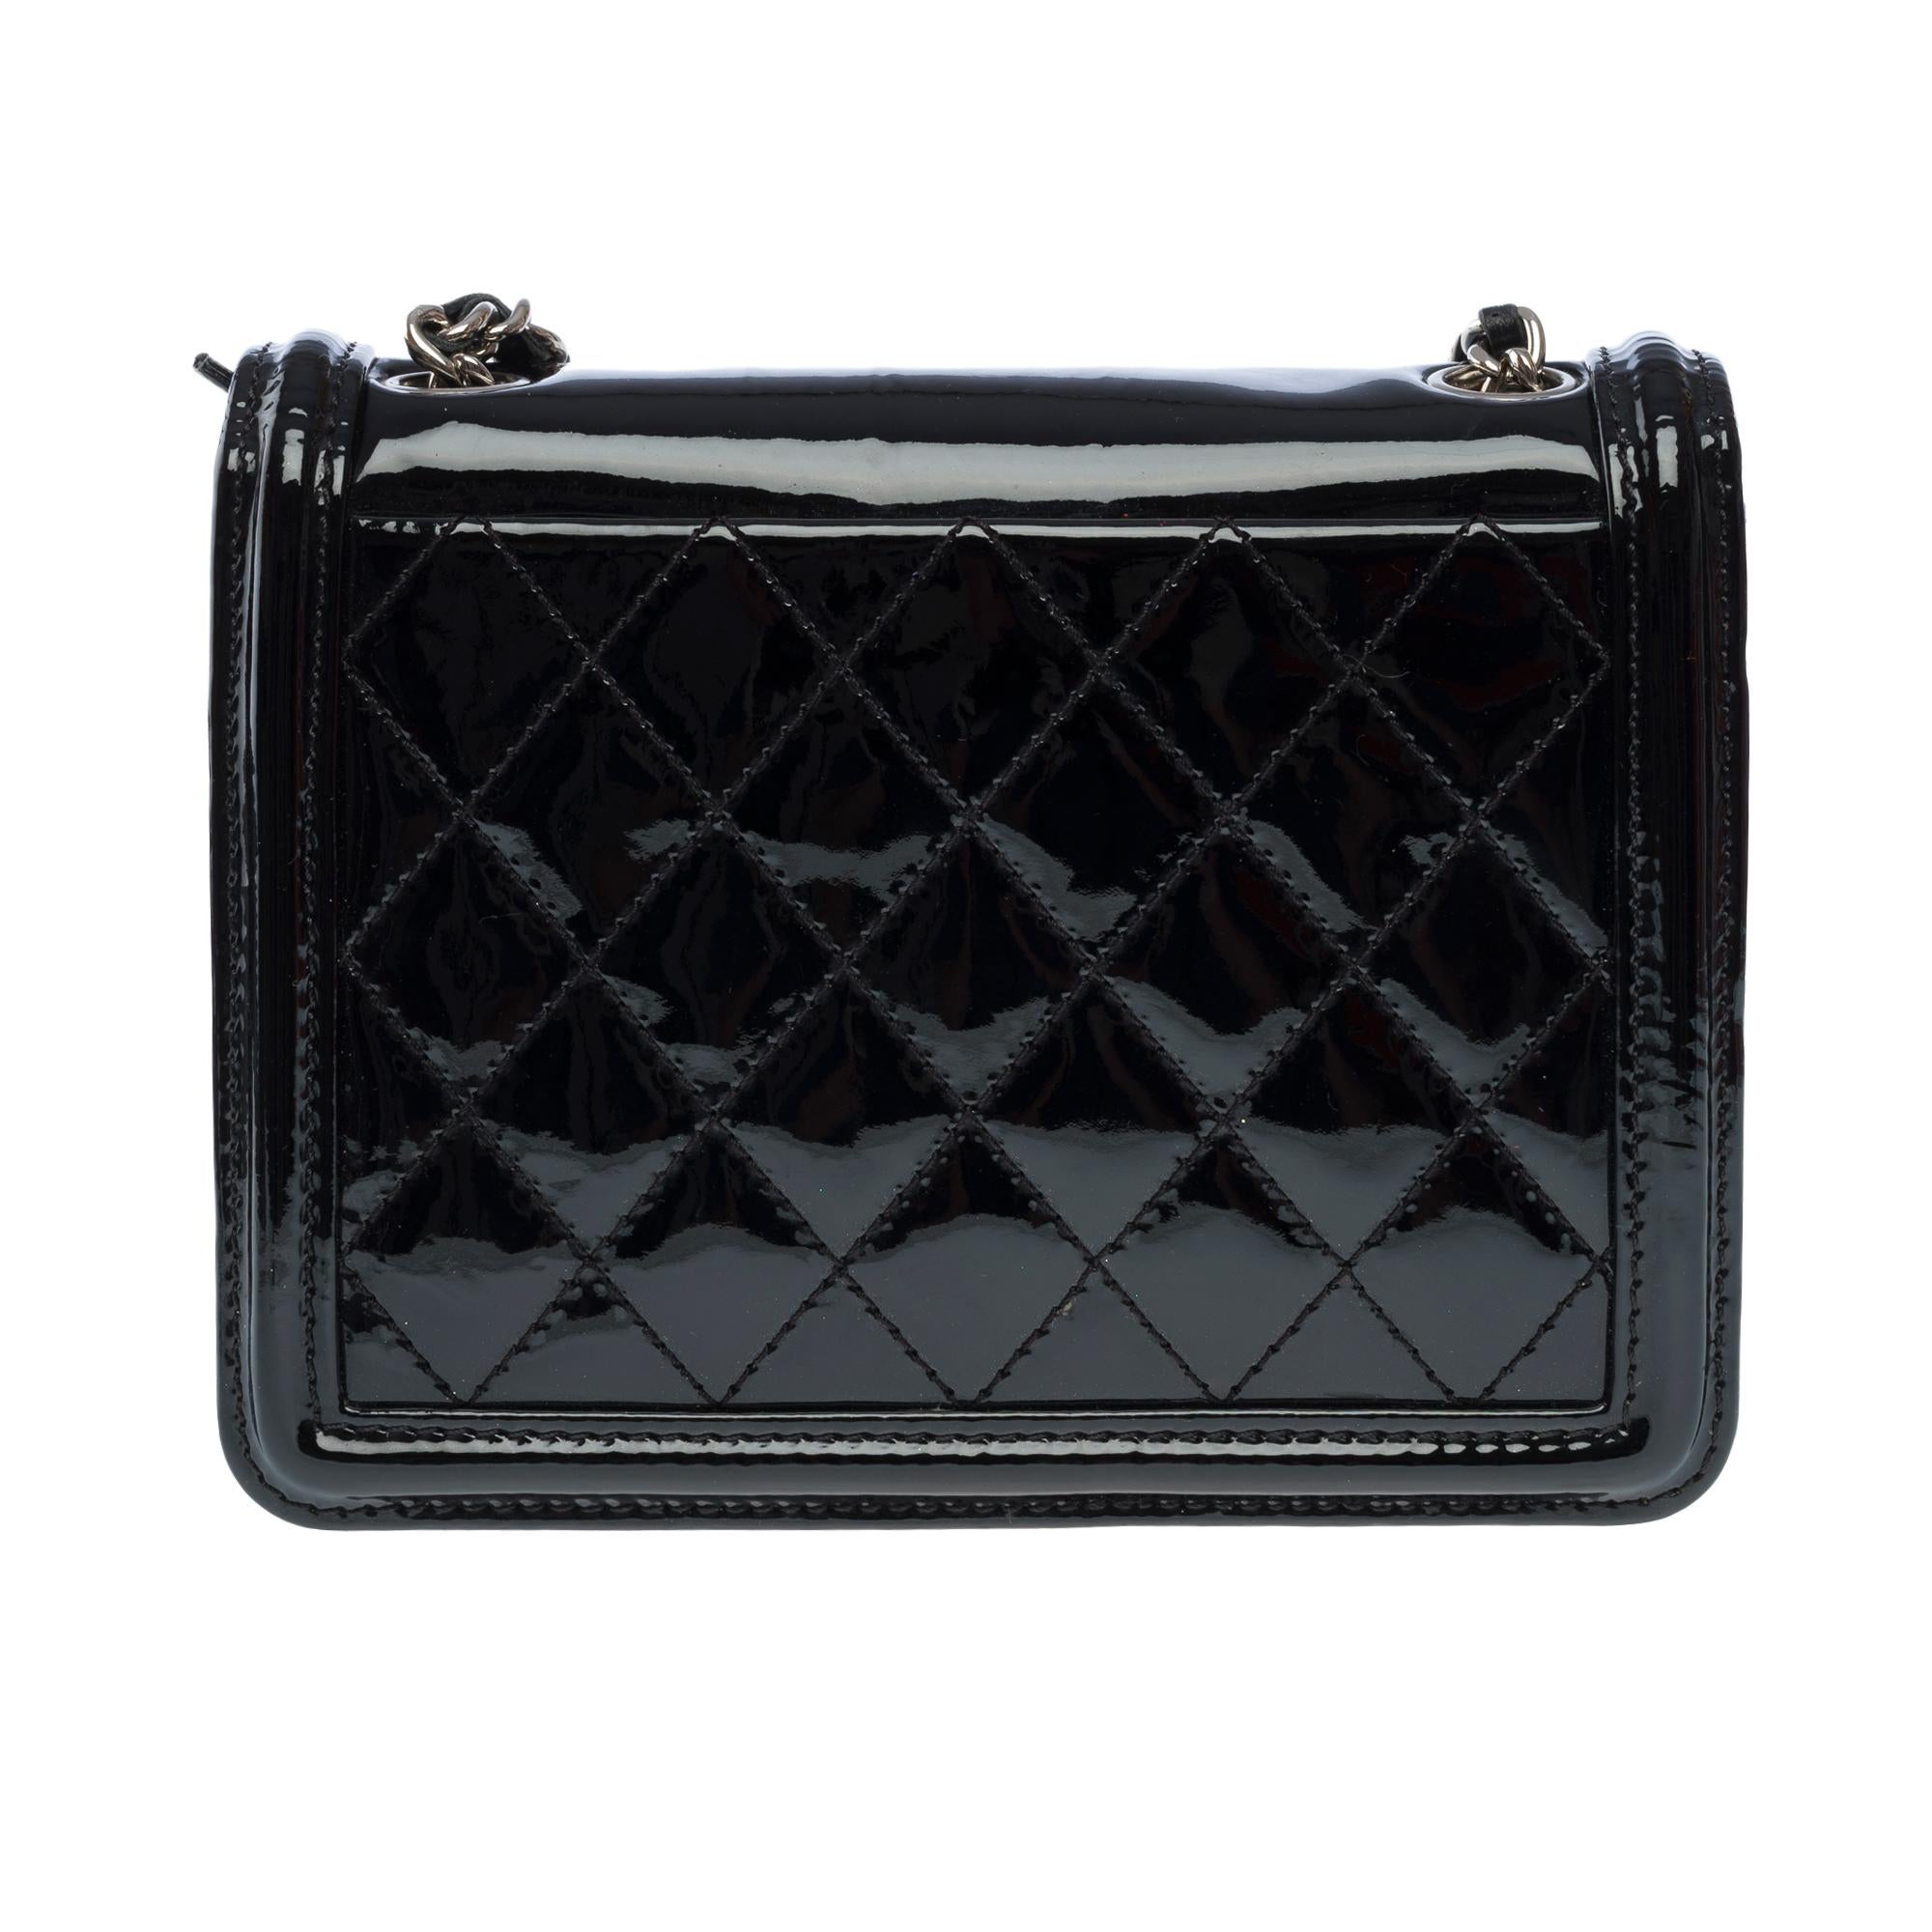 Women's Limited edition Chanel Mini Lego Brick shoulder flap bag in Black leather, SHW For Sale